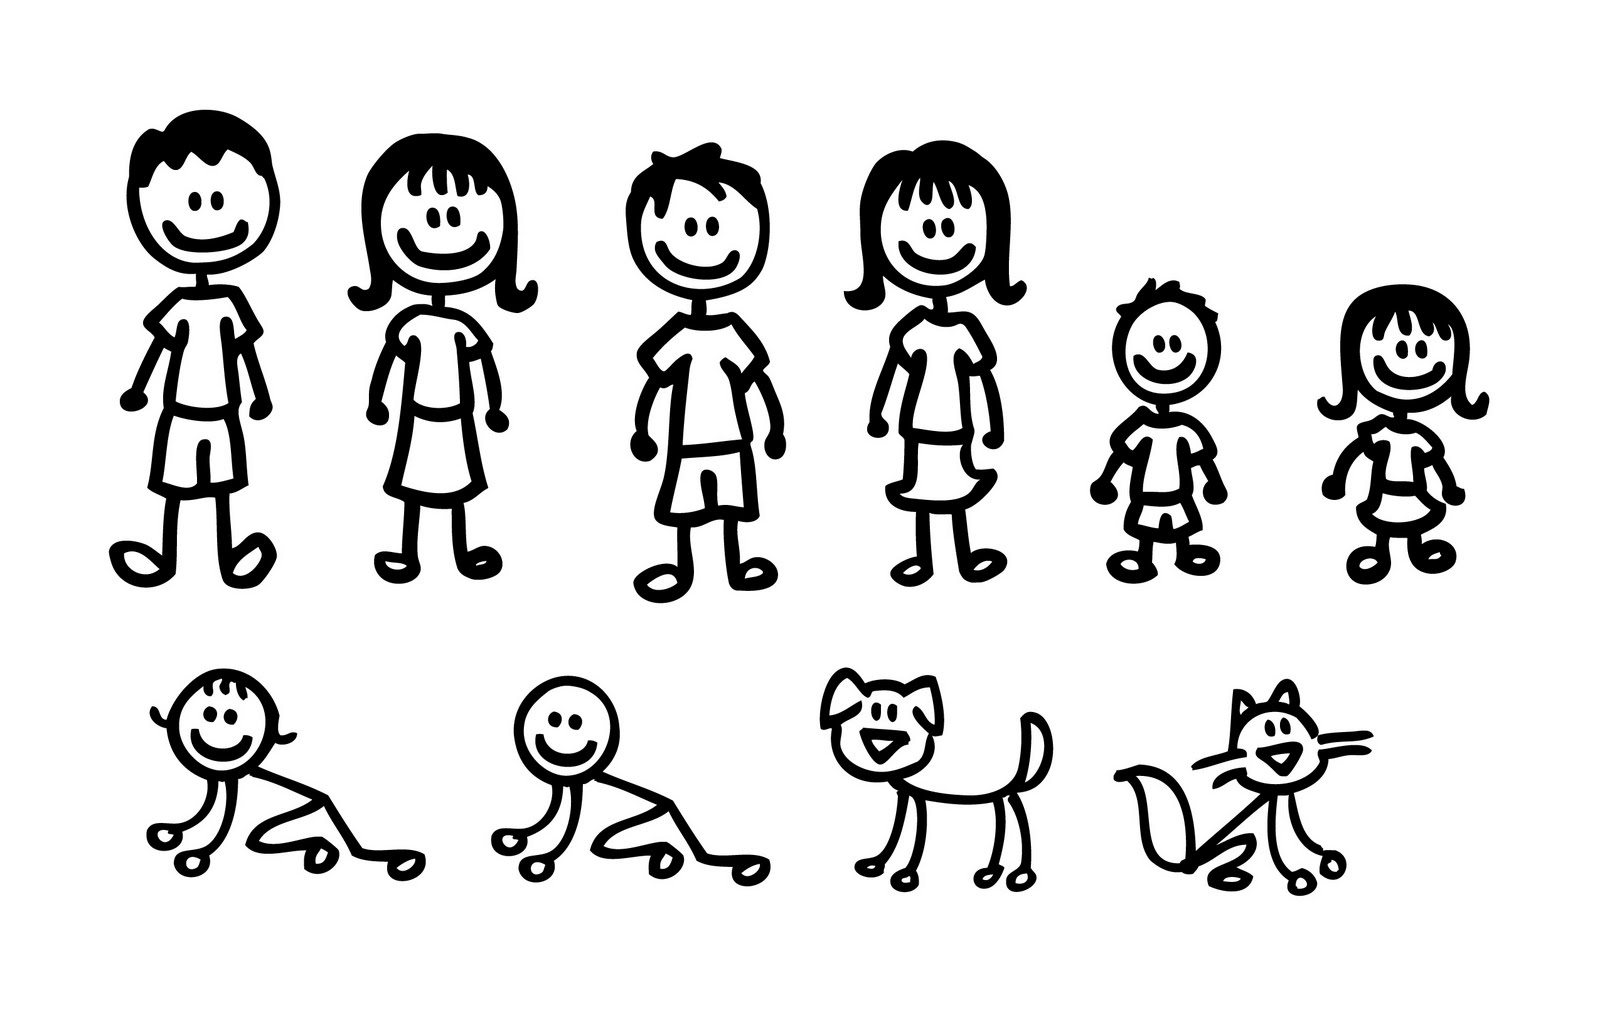 free clipart images stick figures - photo #44